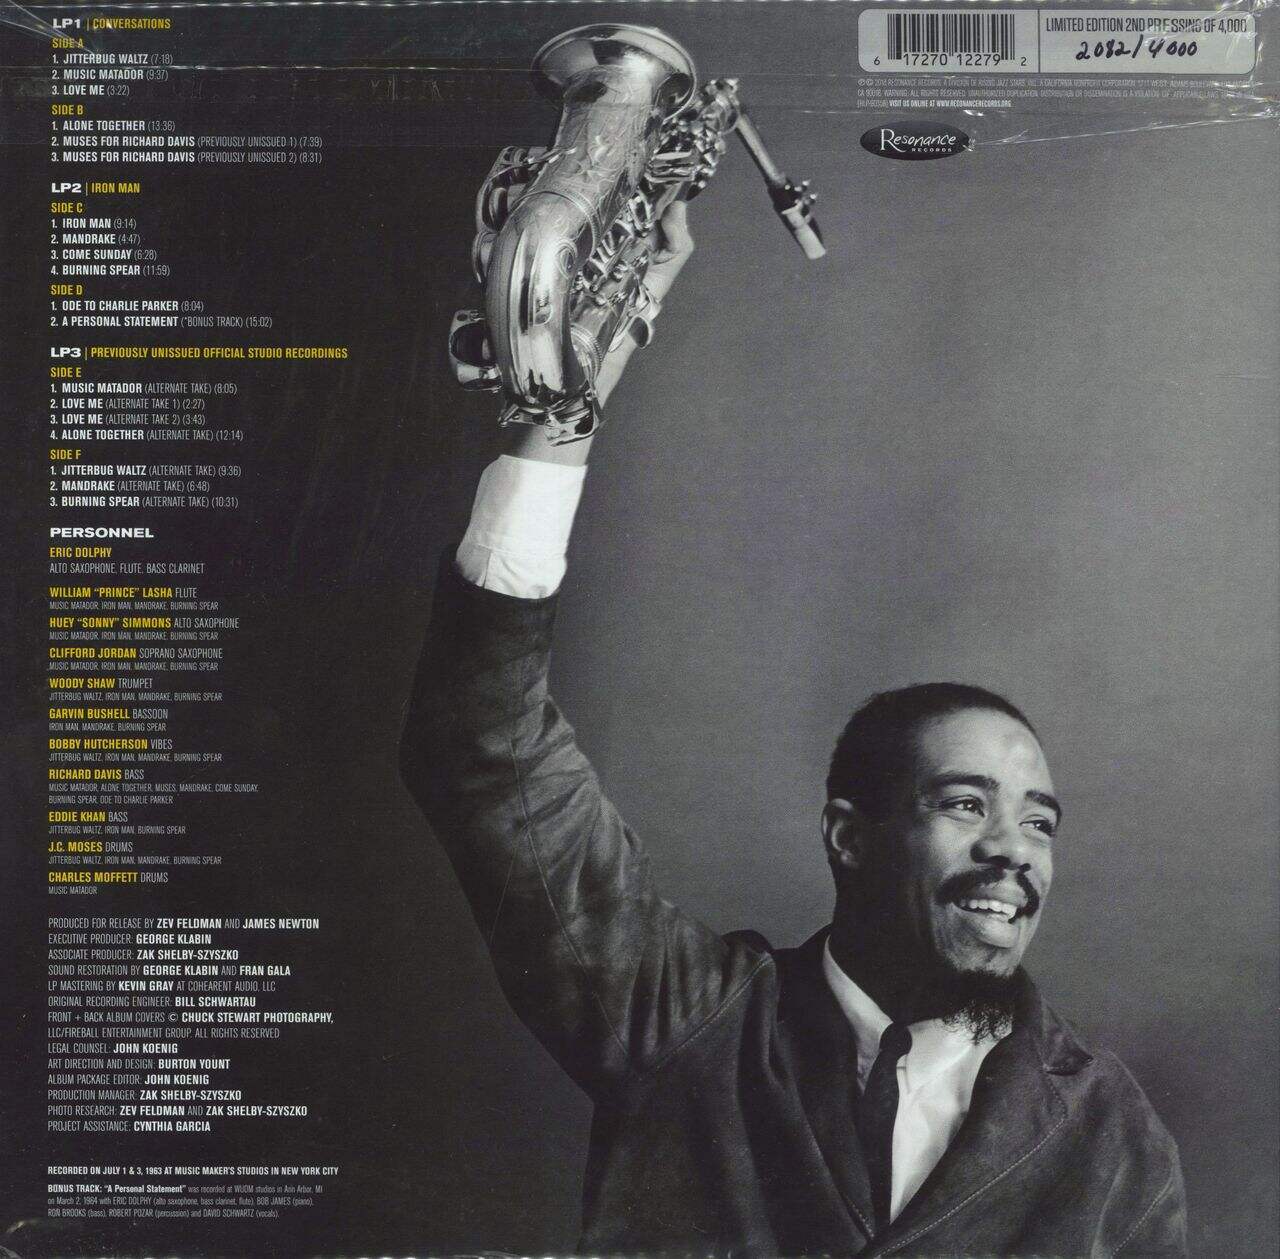 Eric Dolphy Musical Prophet (The Expanded 1963 New York Studio Sessions) - 180gm US 3-LP vinyl set